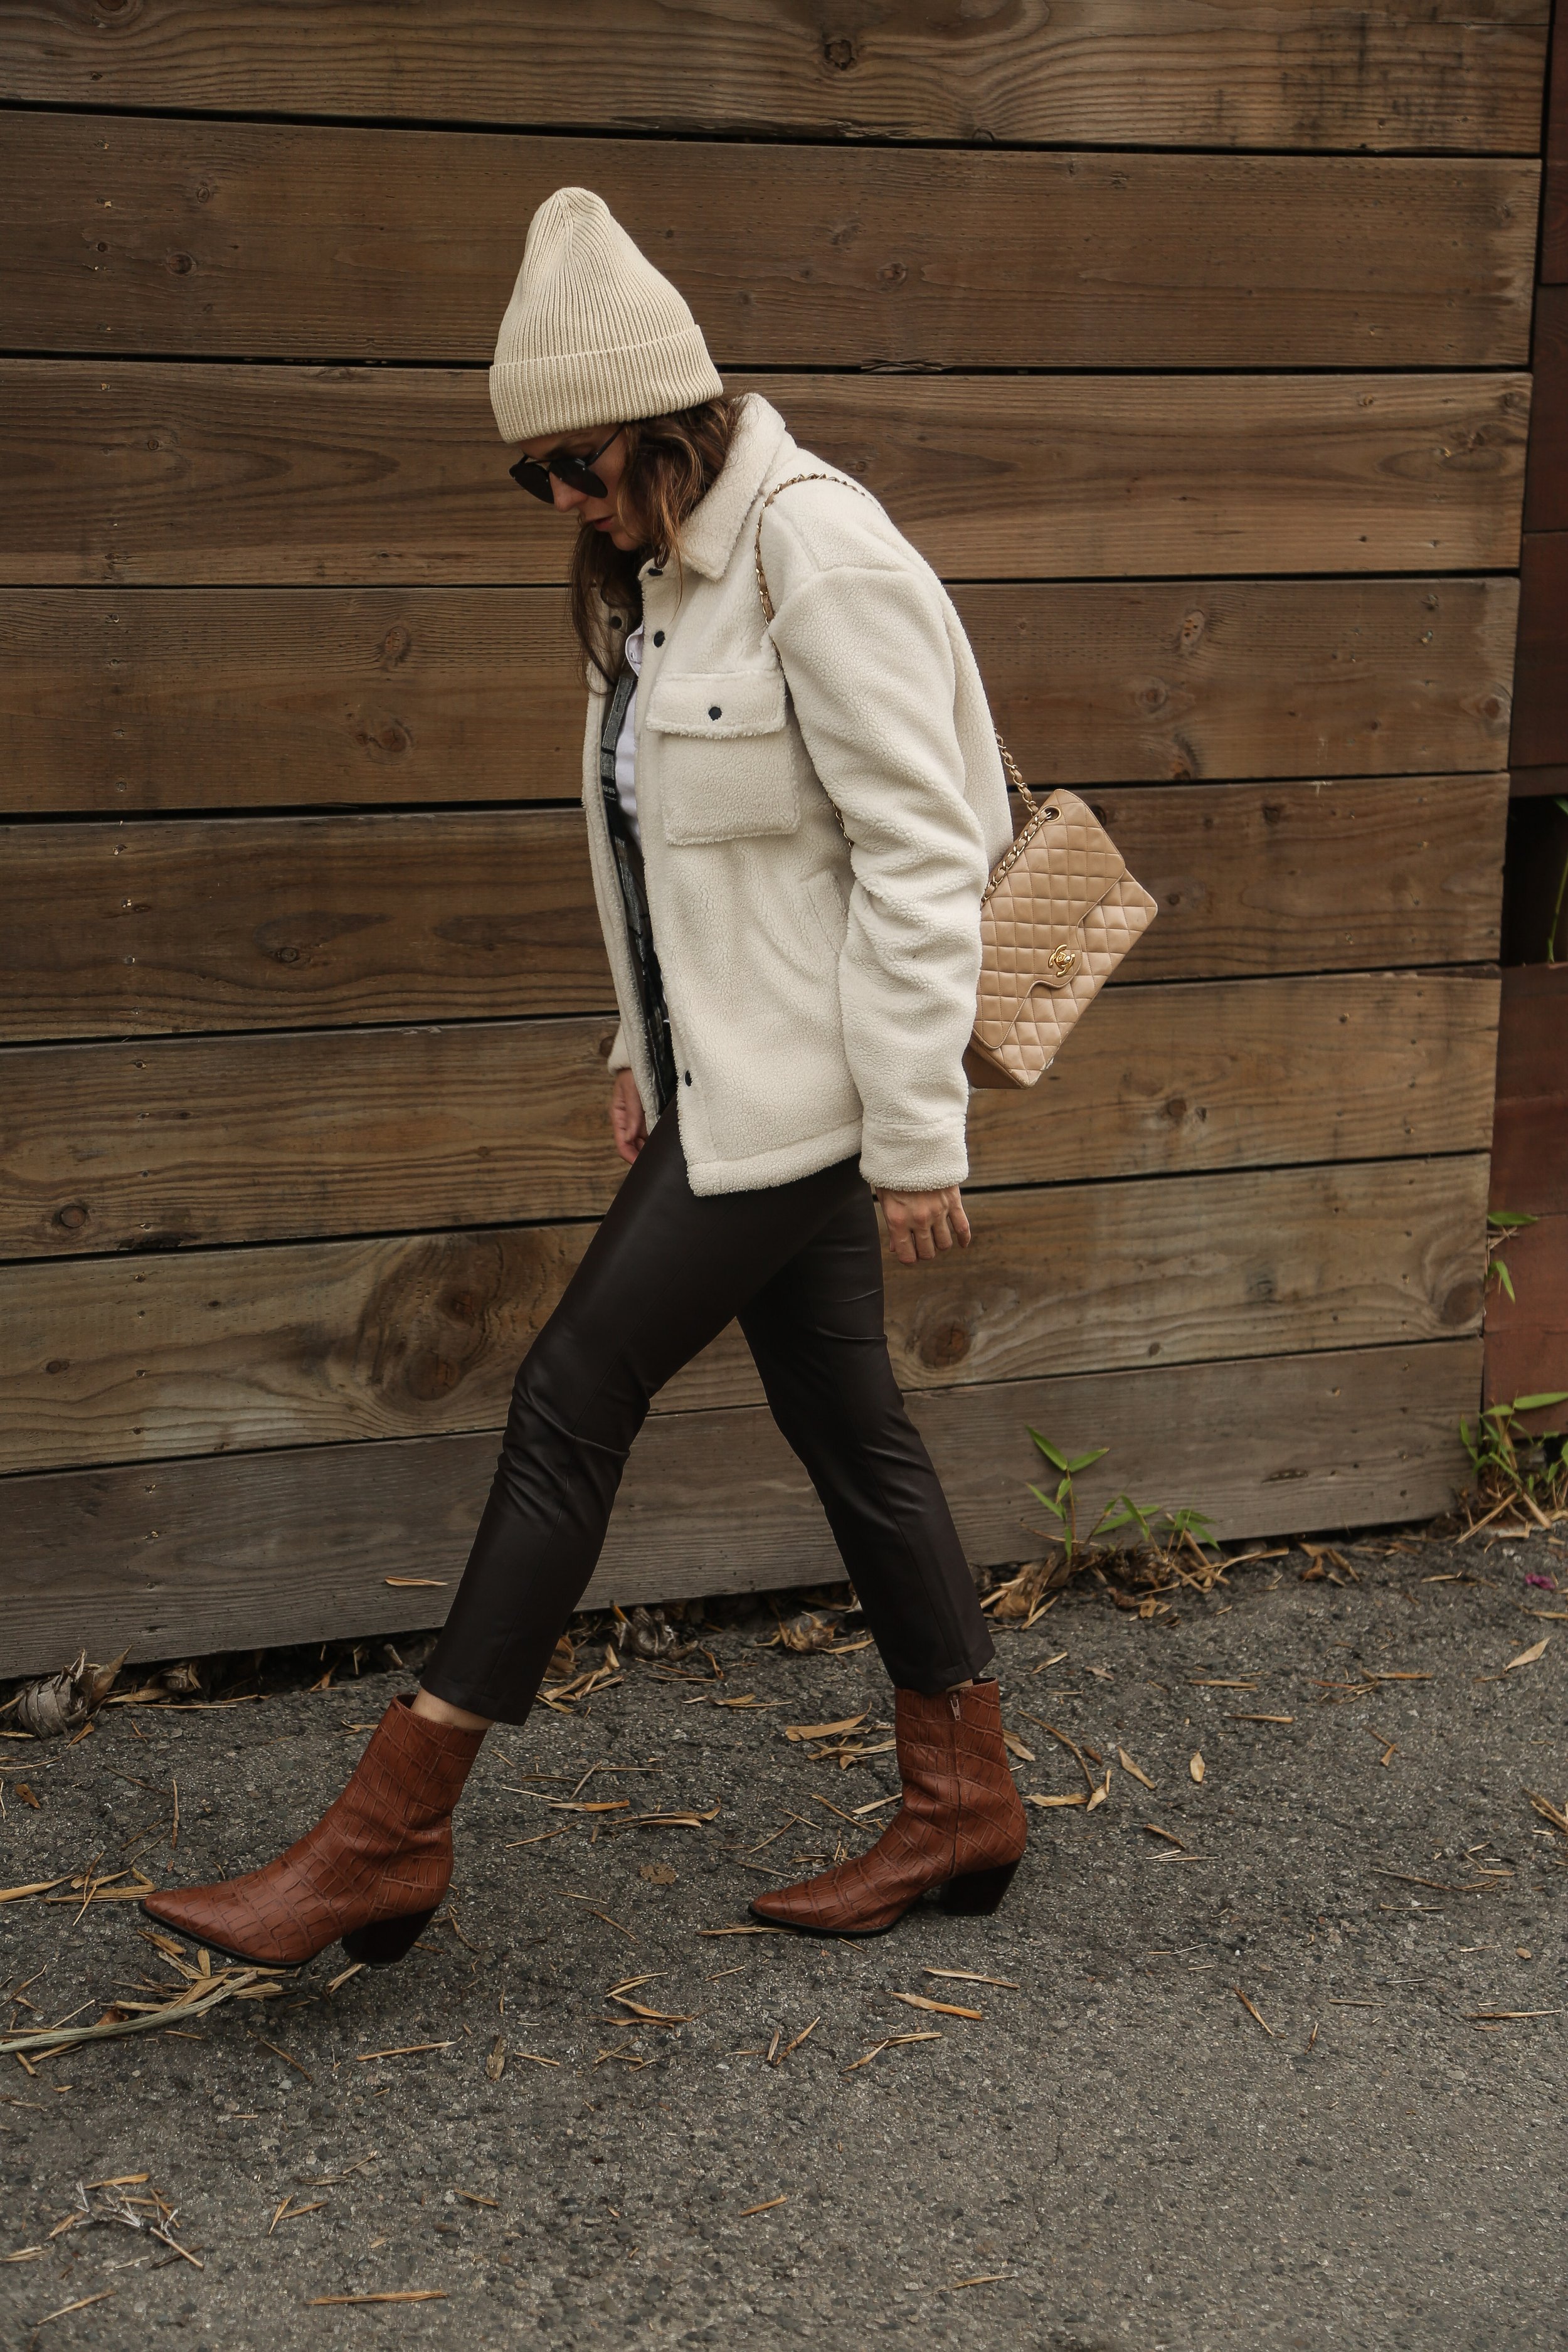 How To Style Brown Leather Pants For Fall